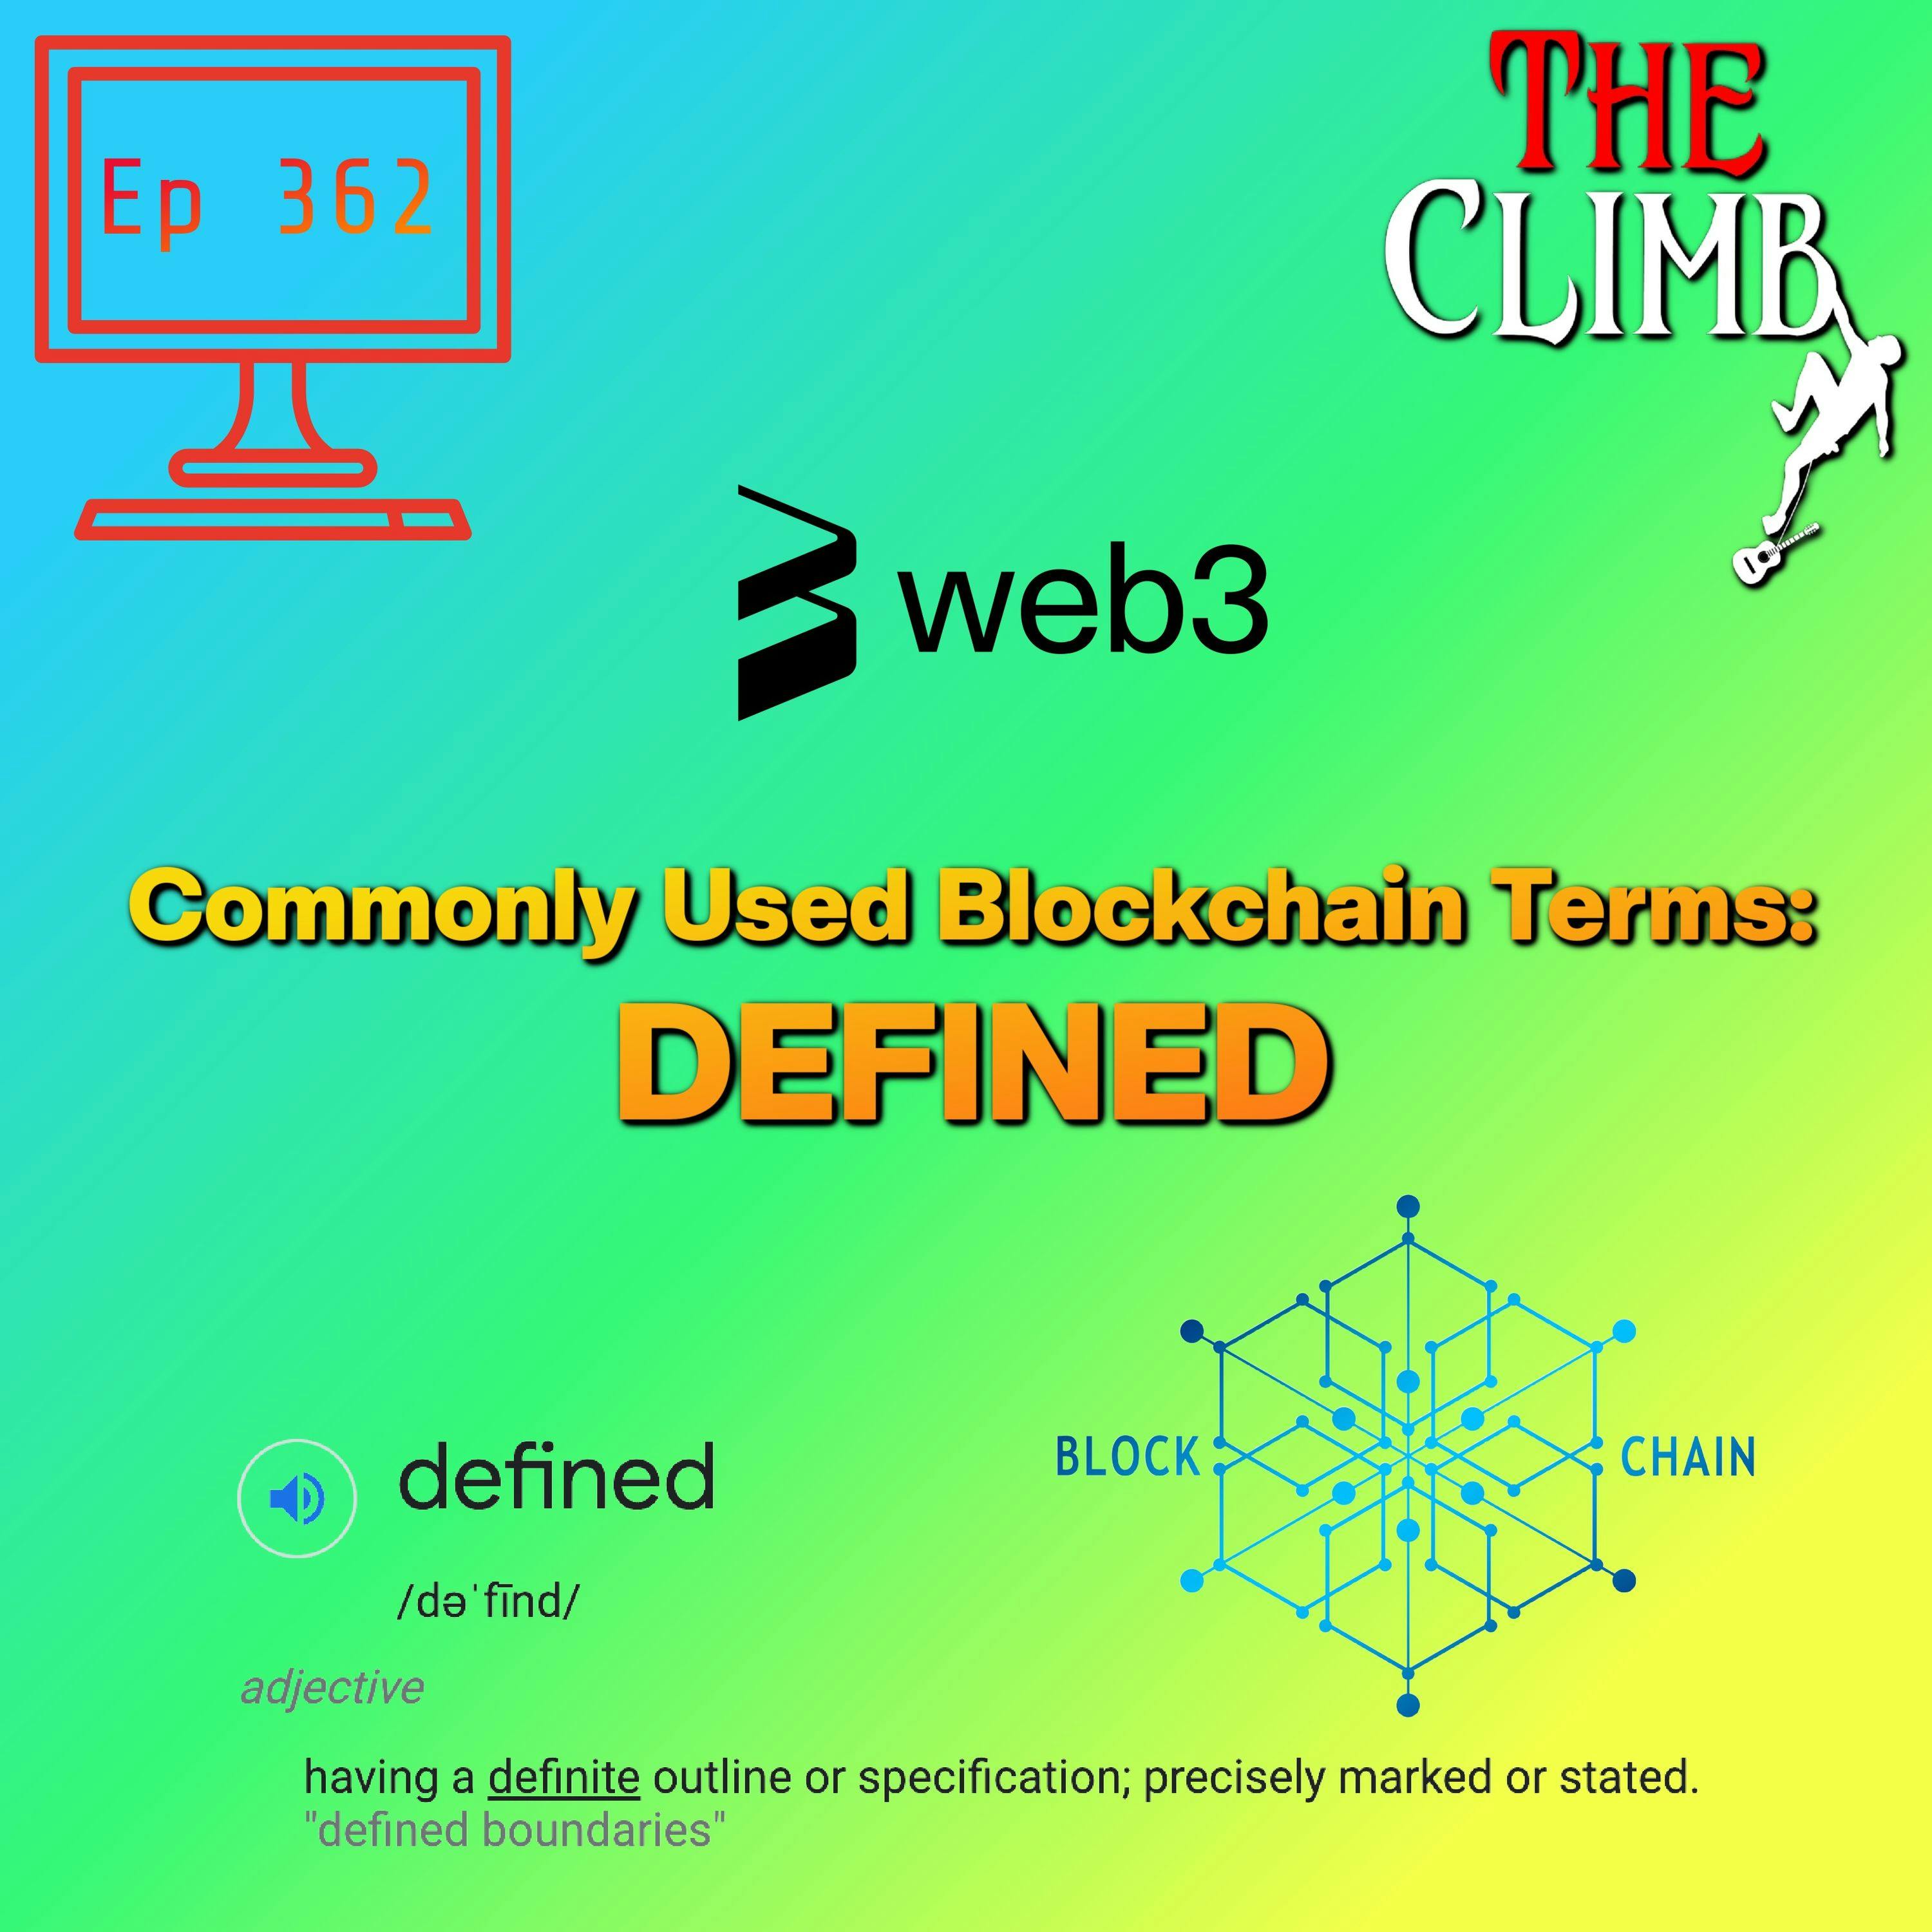 Ep 362: Commonly Used Blockchain Terms: DEFINED